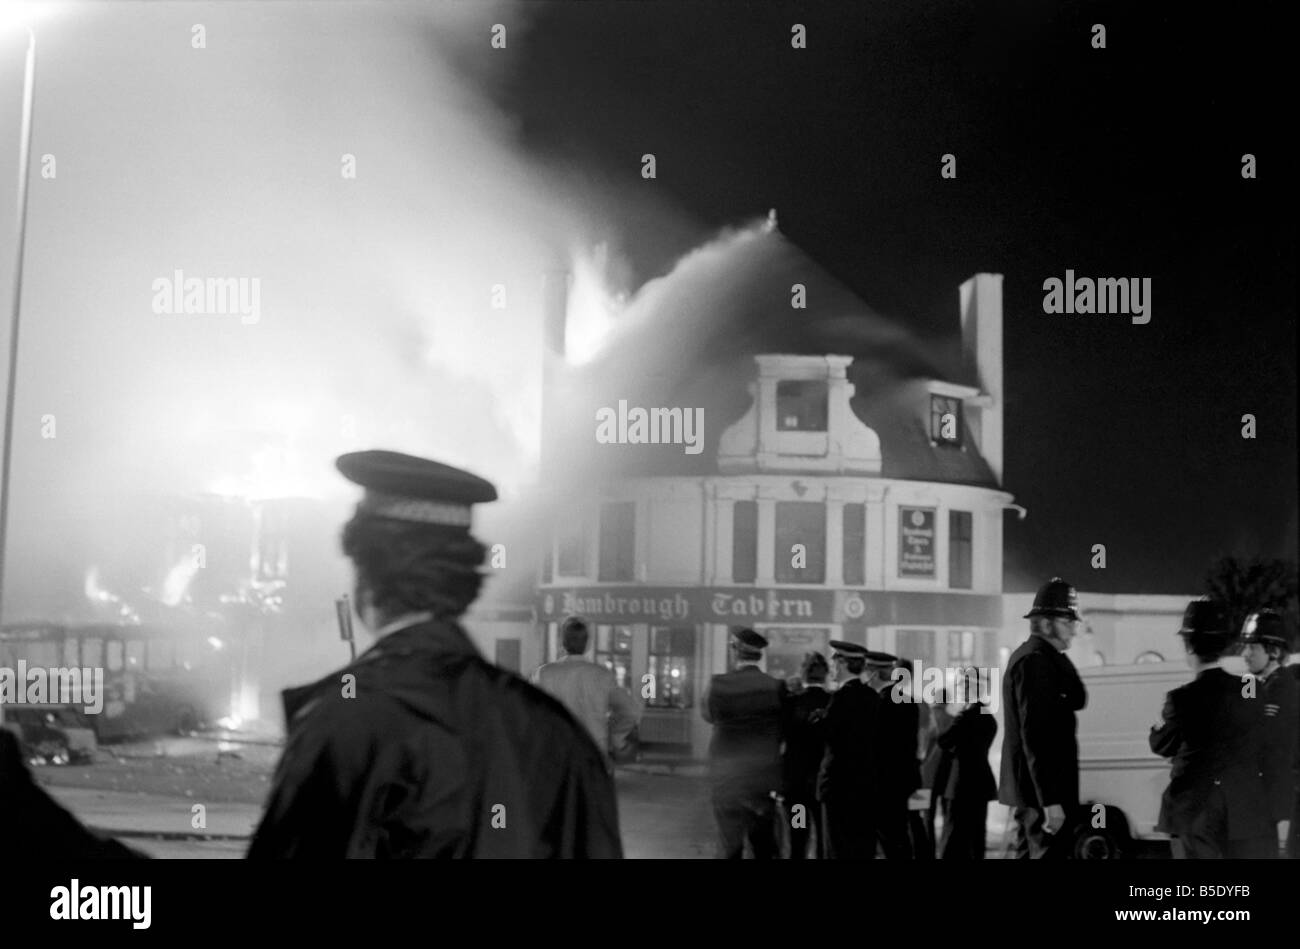 Southall Riots: London: Destruction: The Hambrough Tavern in Uxbridge Road, Southall burning fiercely last night after it had been set alight during clashes between Skinheads and Asian Youths. July 1981 81-03792a-006 Stock Photo